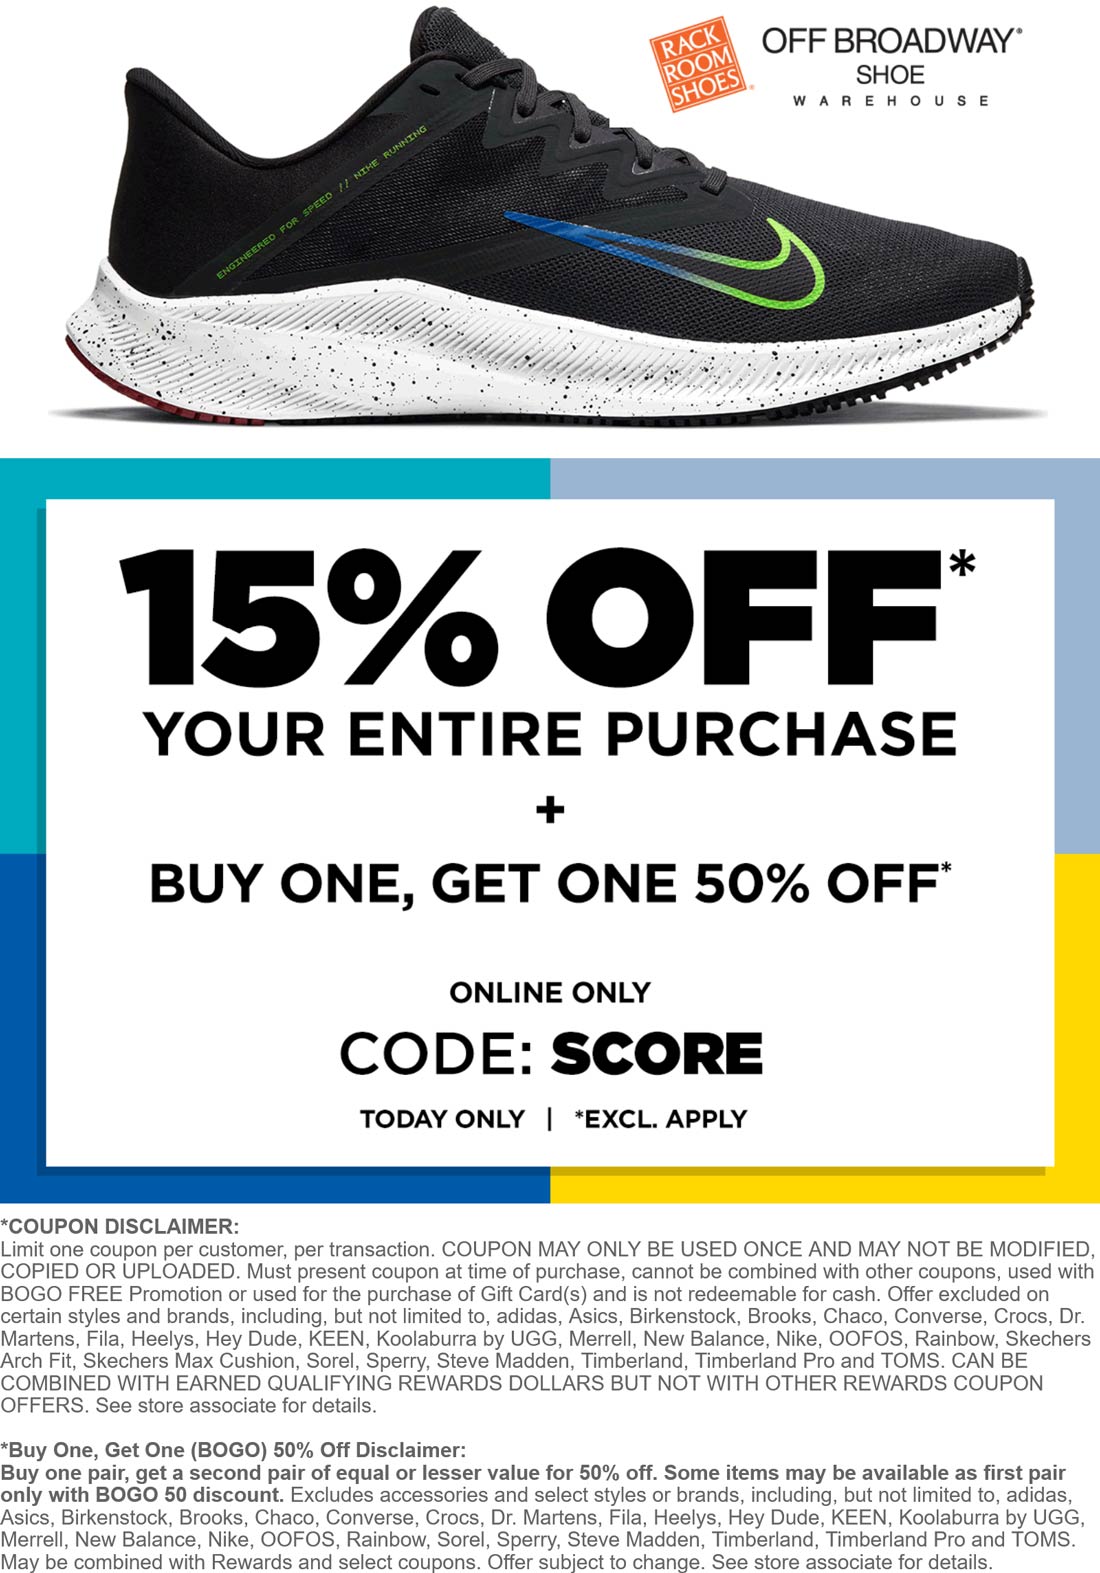 Rack Room Shoes stores Coupon  15% off + 50% off second pair today at Rack Room Shoes & Off Broadway Shoe Warehouse via promo code SCORE #rackroomshoes 